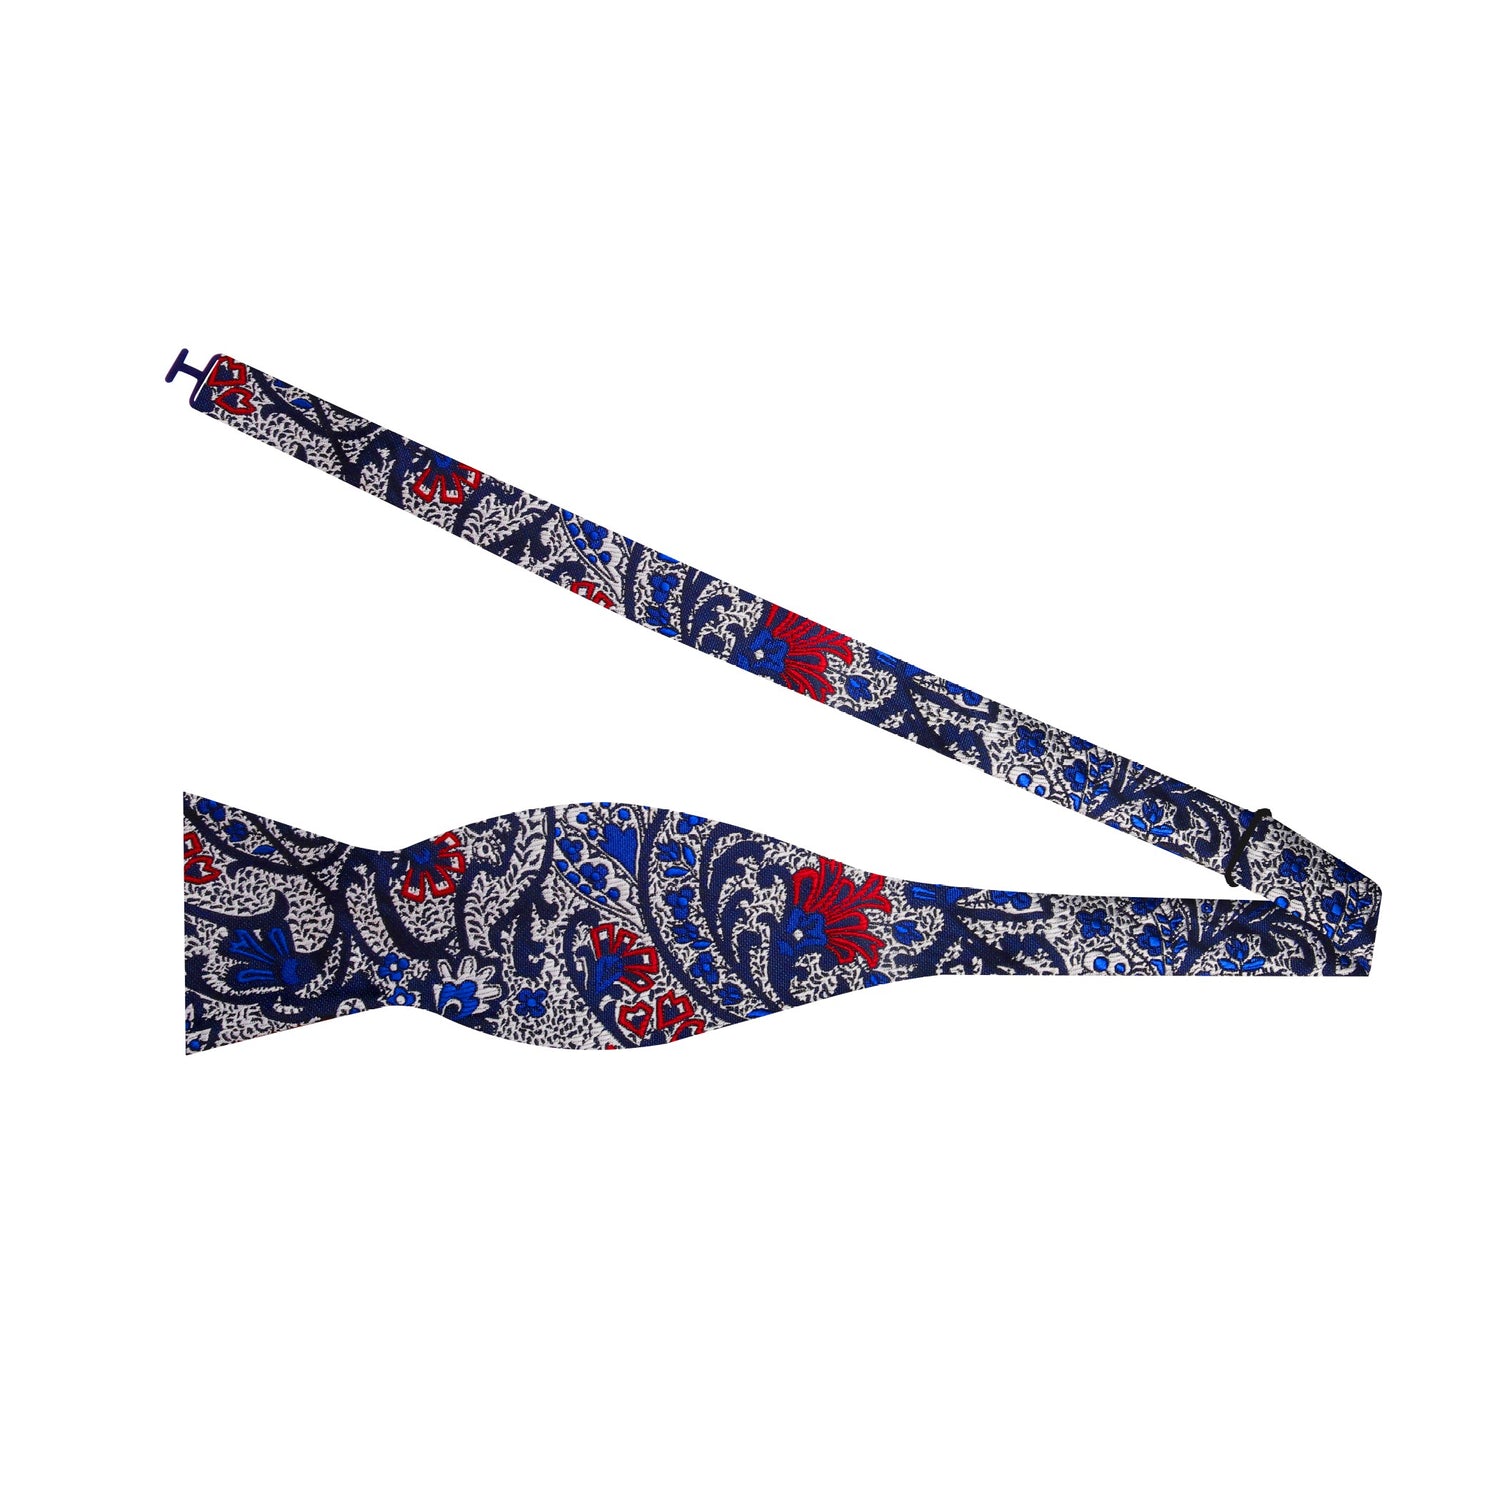 Silver, Blue, Black and Red Paisley Bow Tie Self Tie